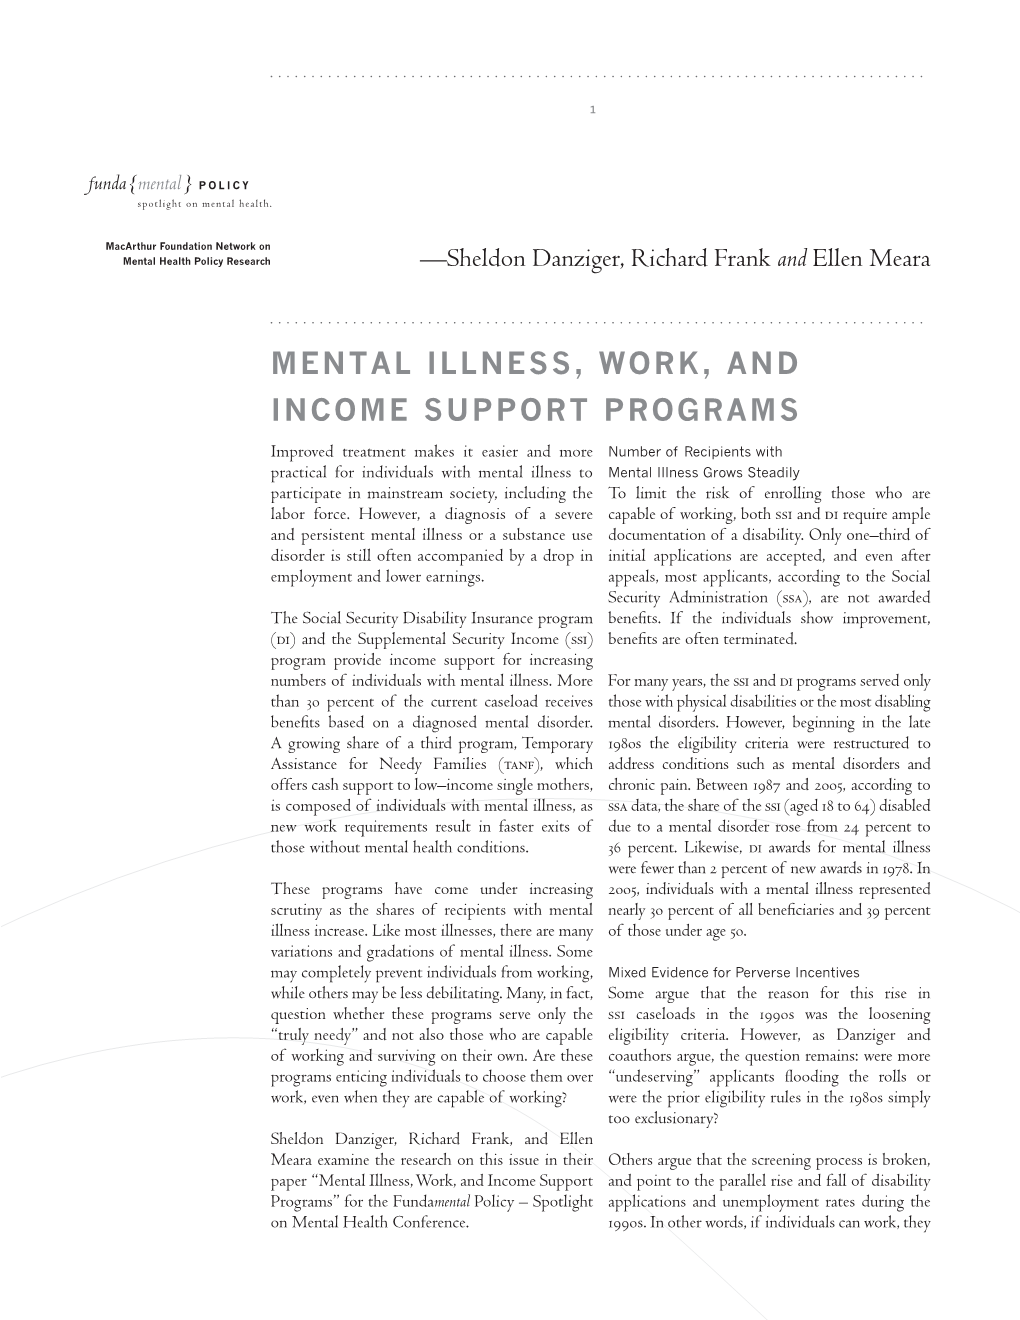 Mental Illness, Work, and Income Support Programs